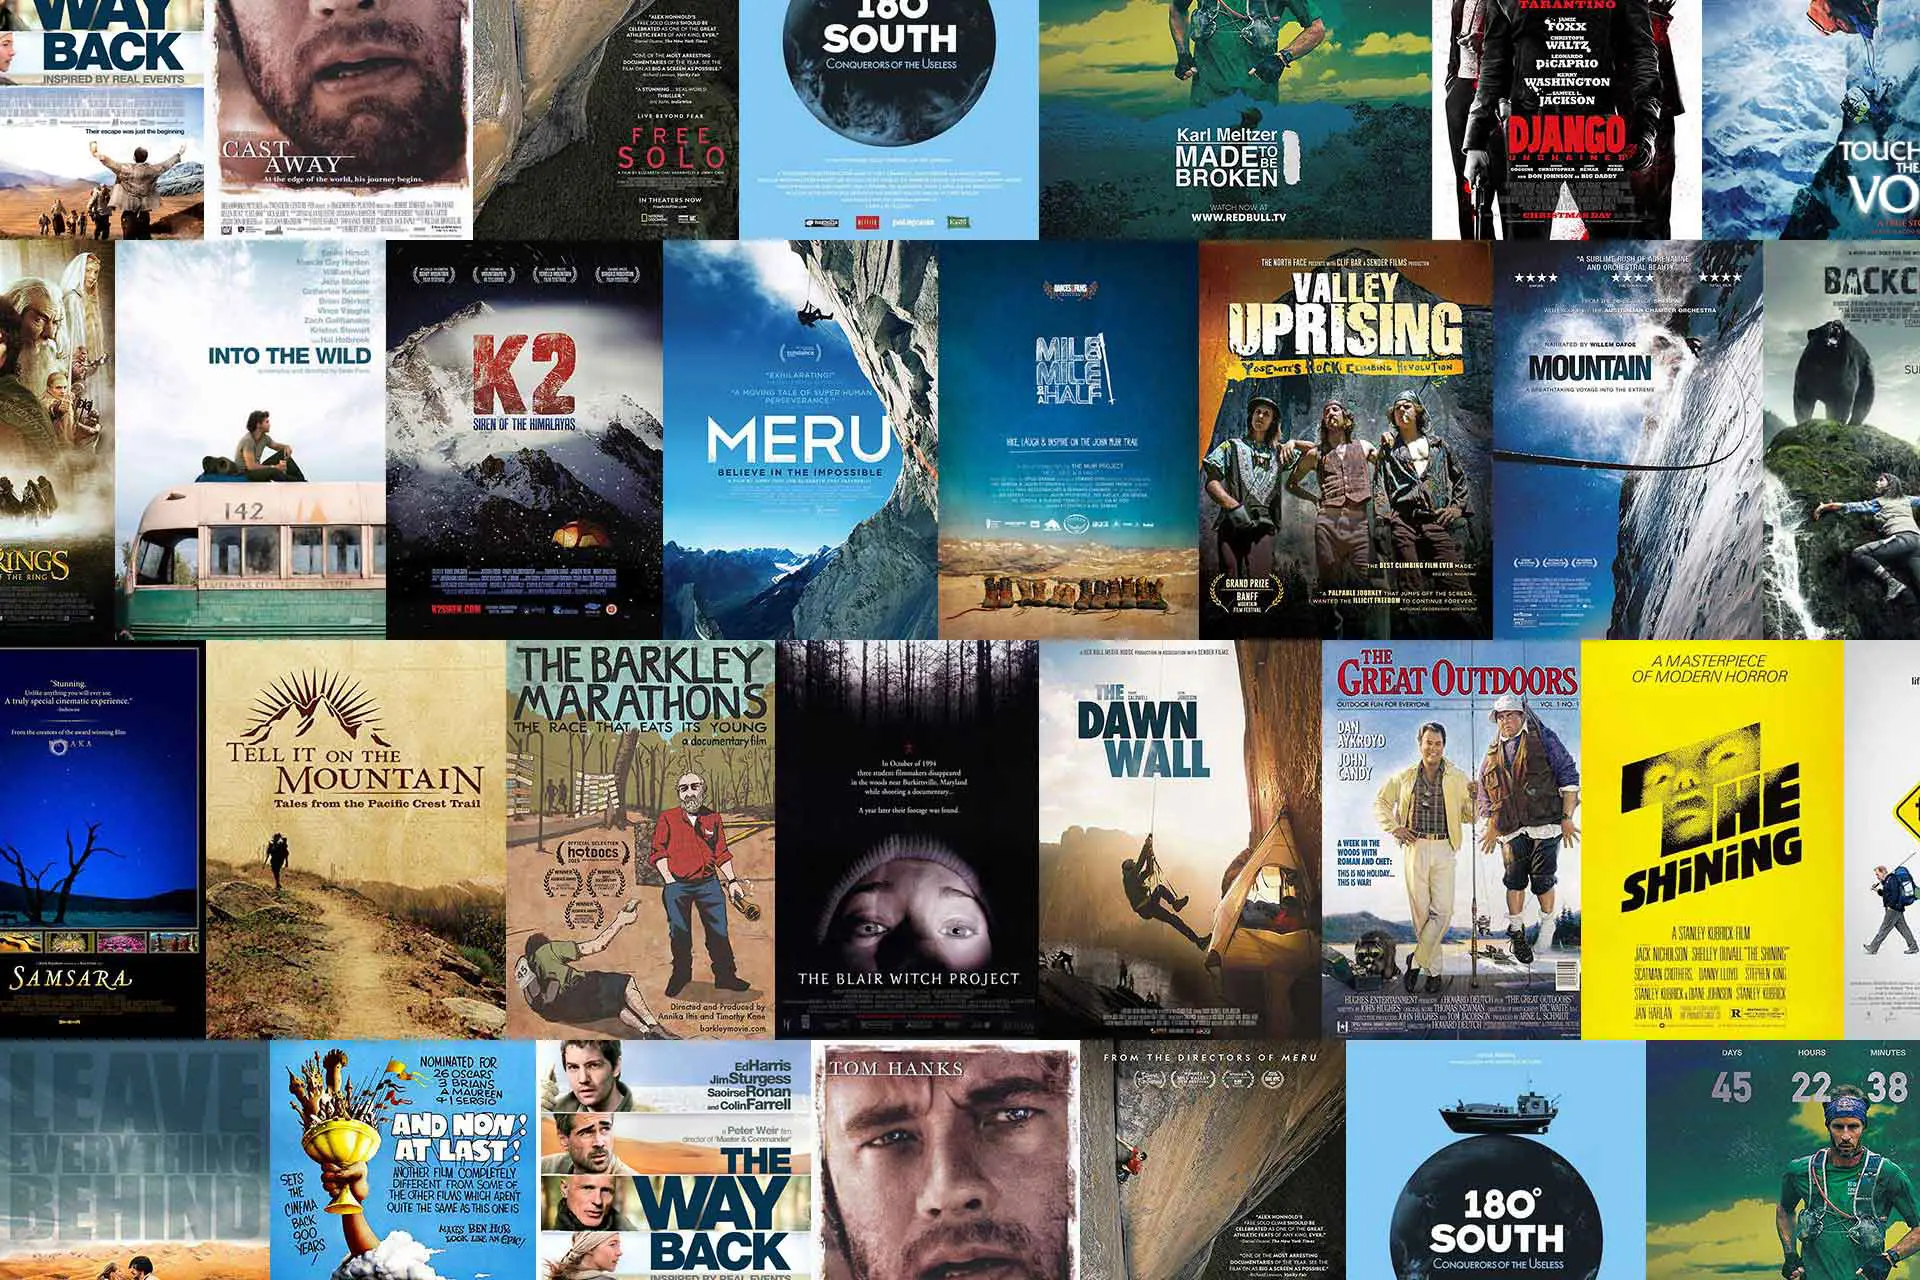 25 Movies to Watch Before Hiking the Pacific Crest Trail